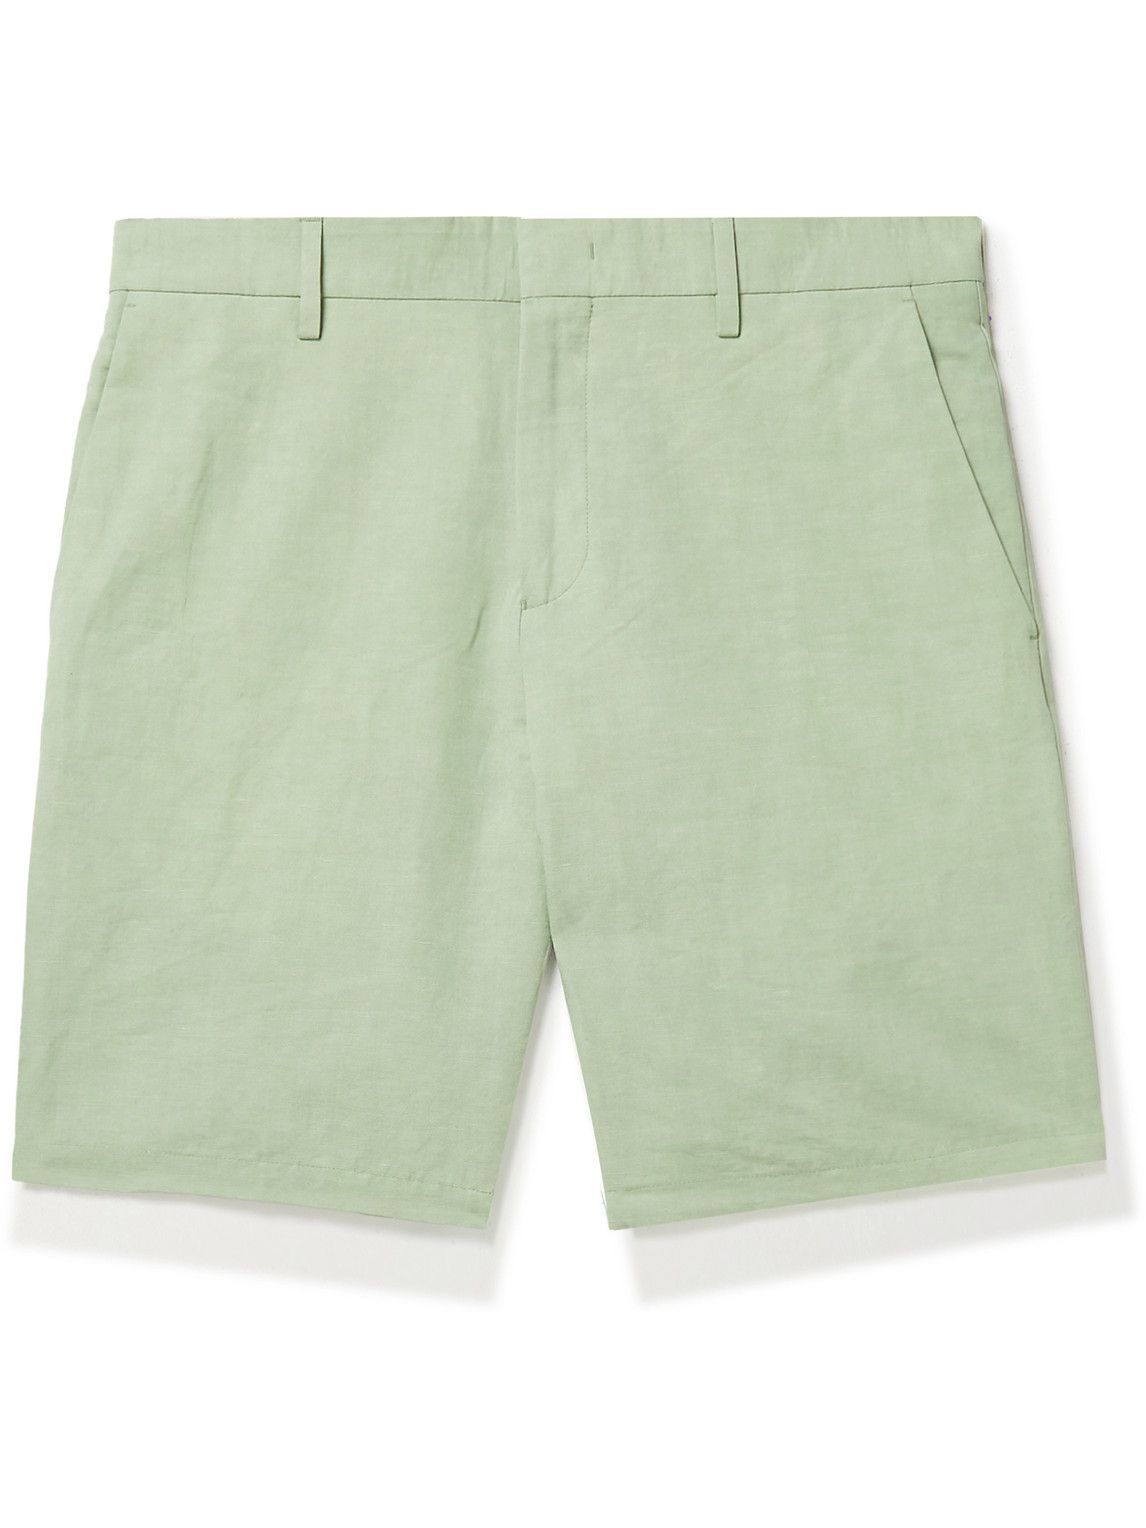 Photo: Paul Smith - Slim-Fit Cotton and Linen-Blend Shorts - Green